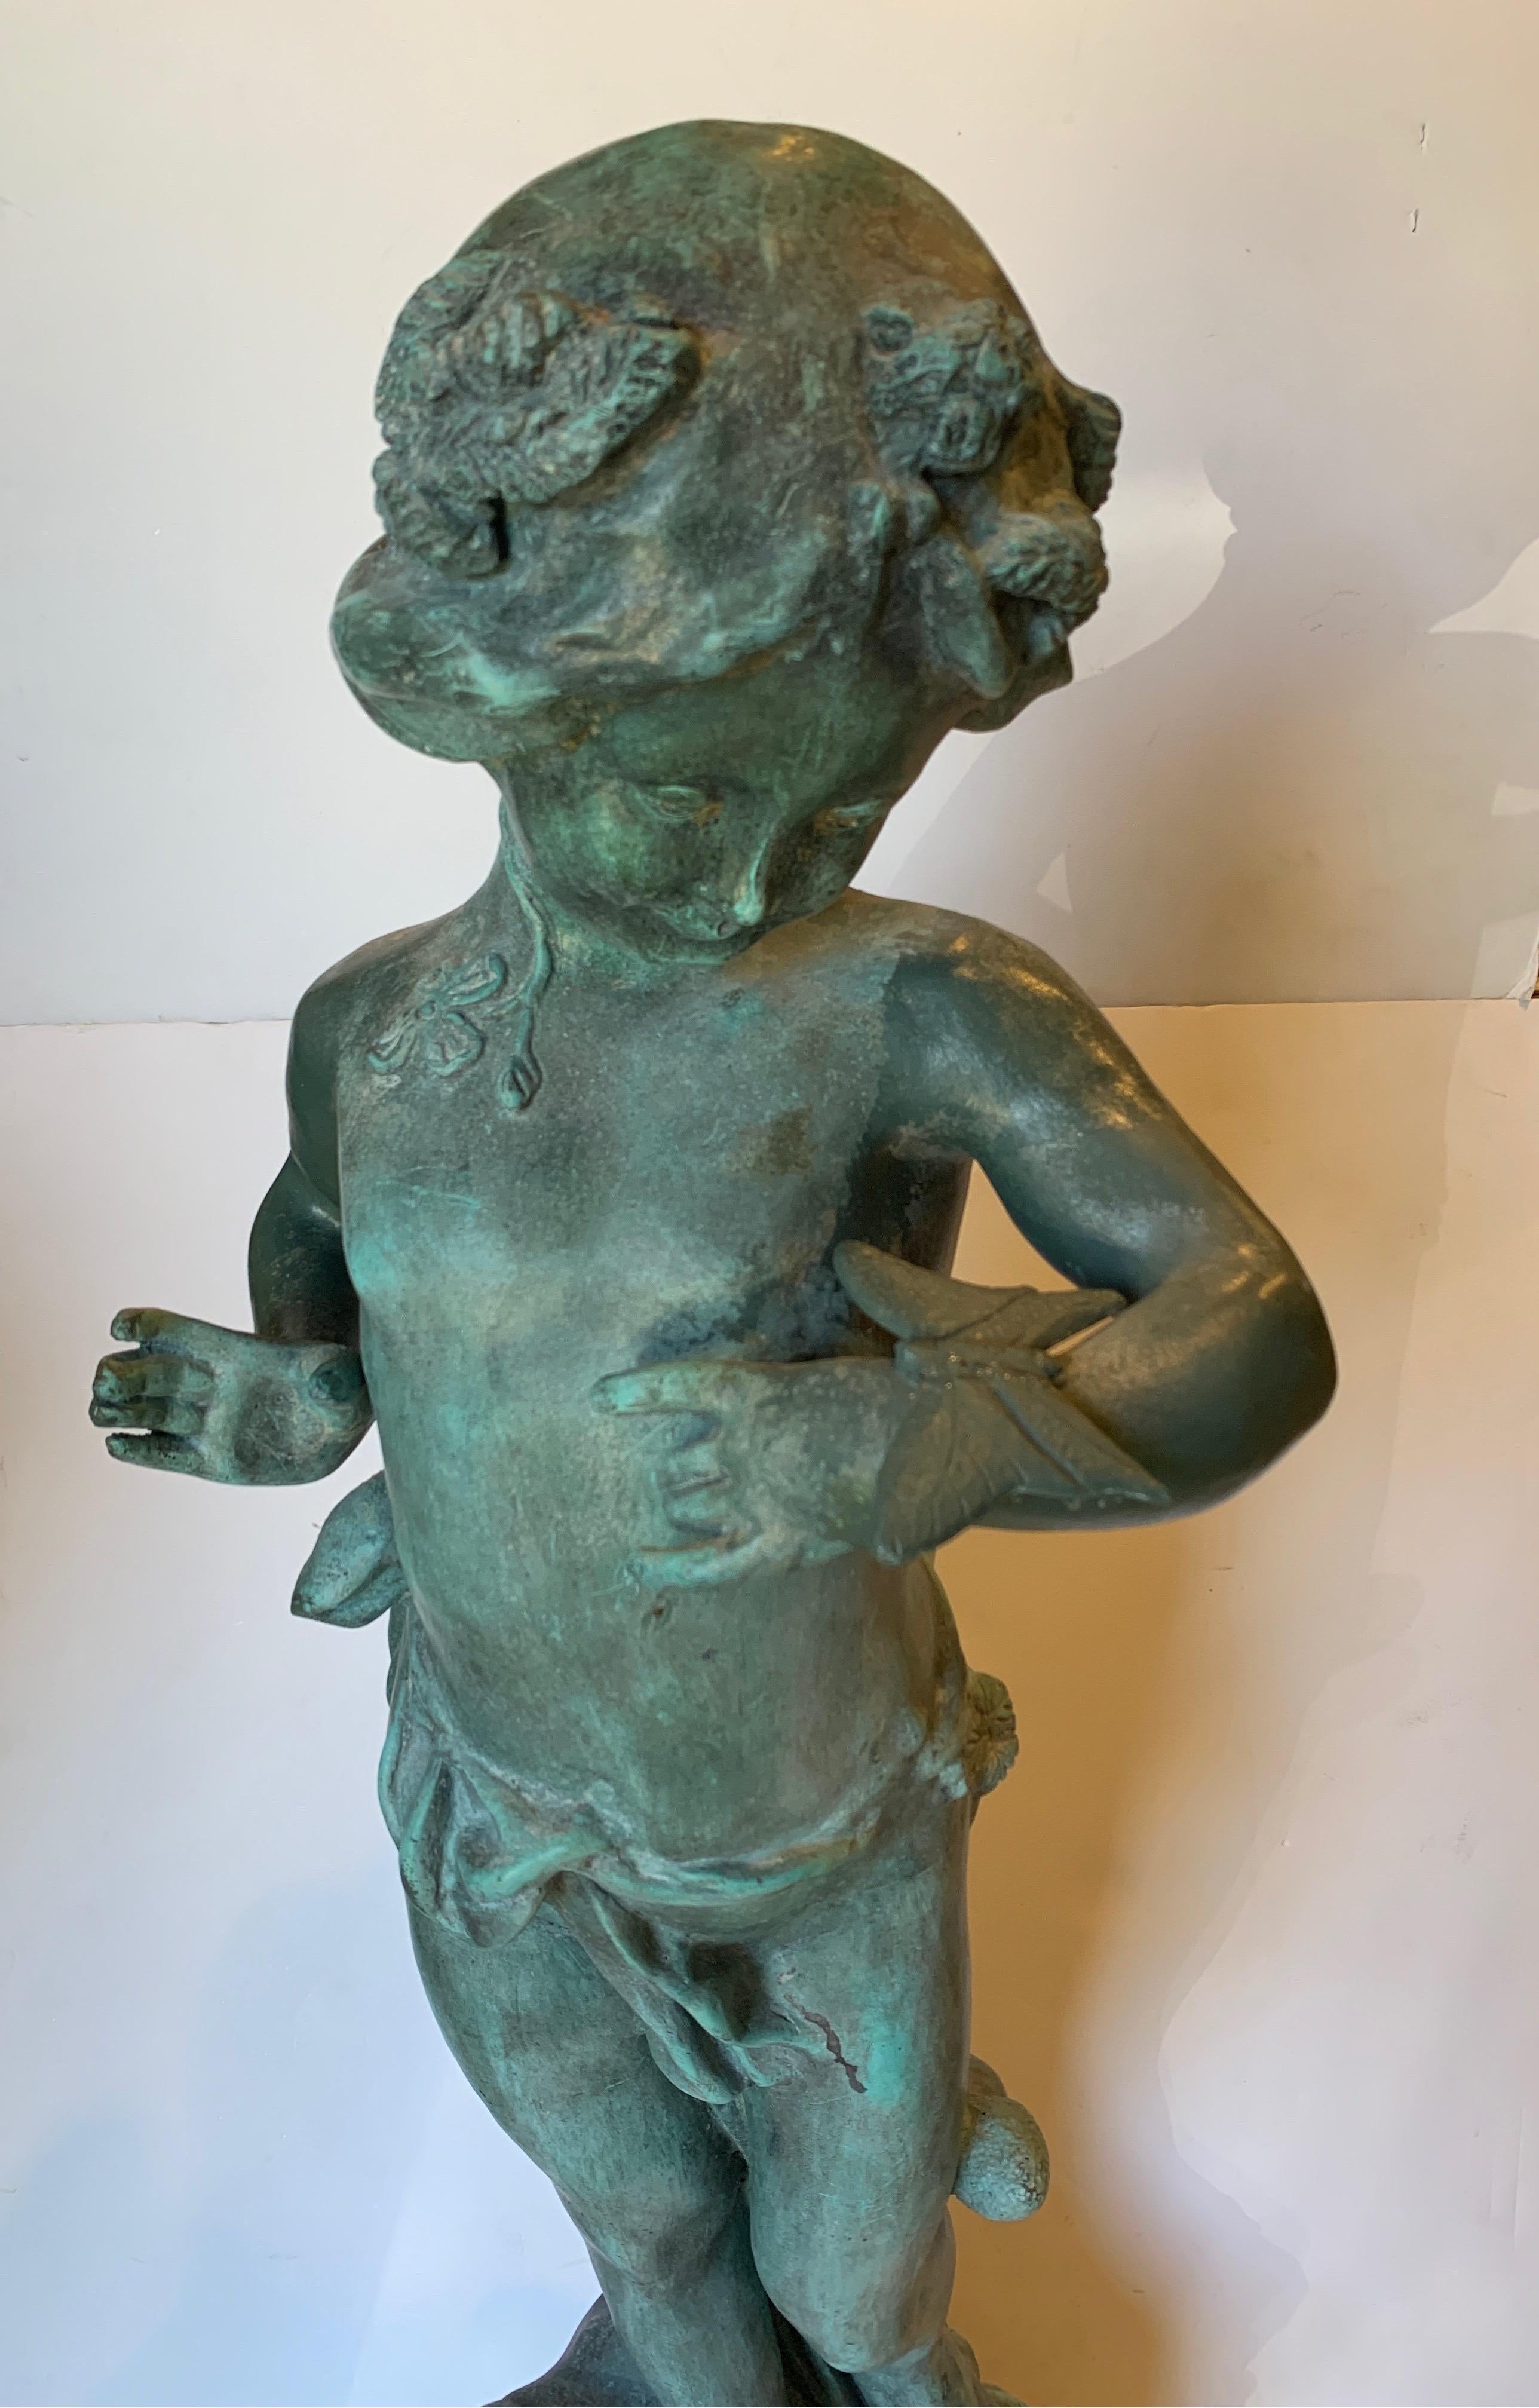 Natural patina lead figure. Girl with a resting butterfly on her arm, early 20th century. Outdoor garden statue.